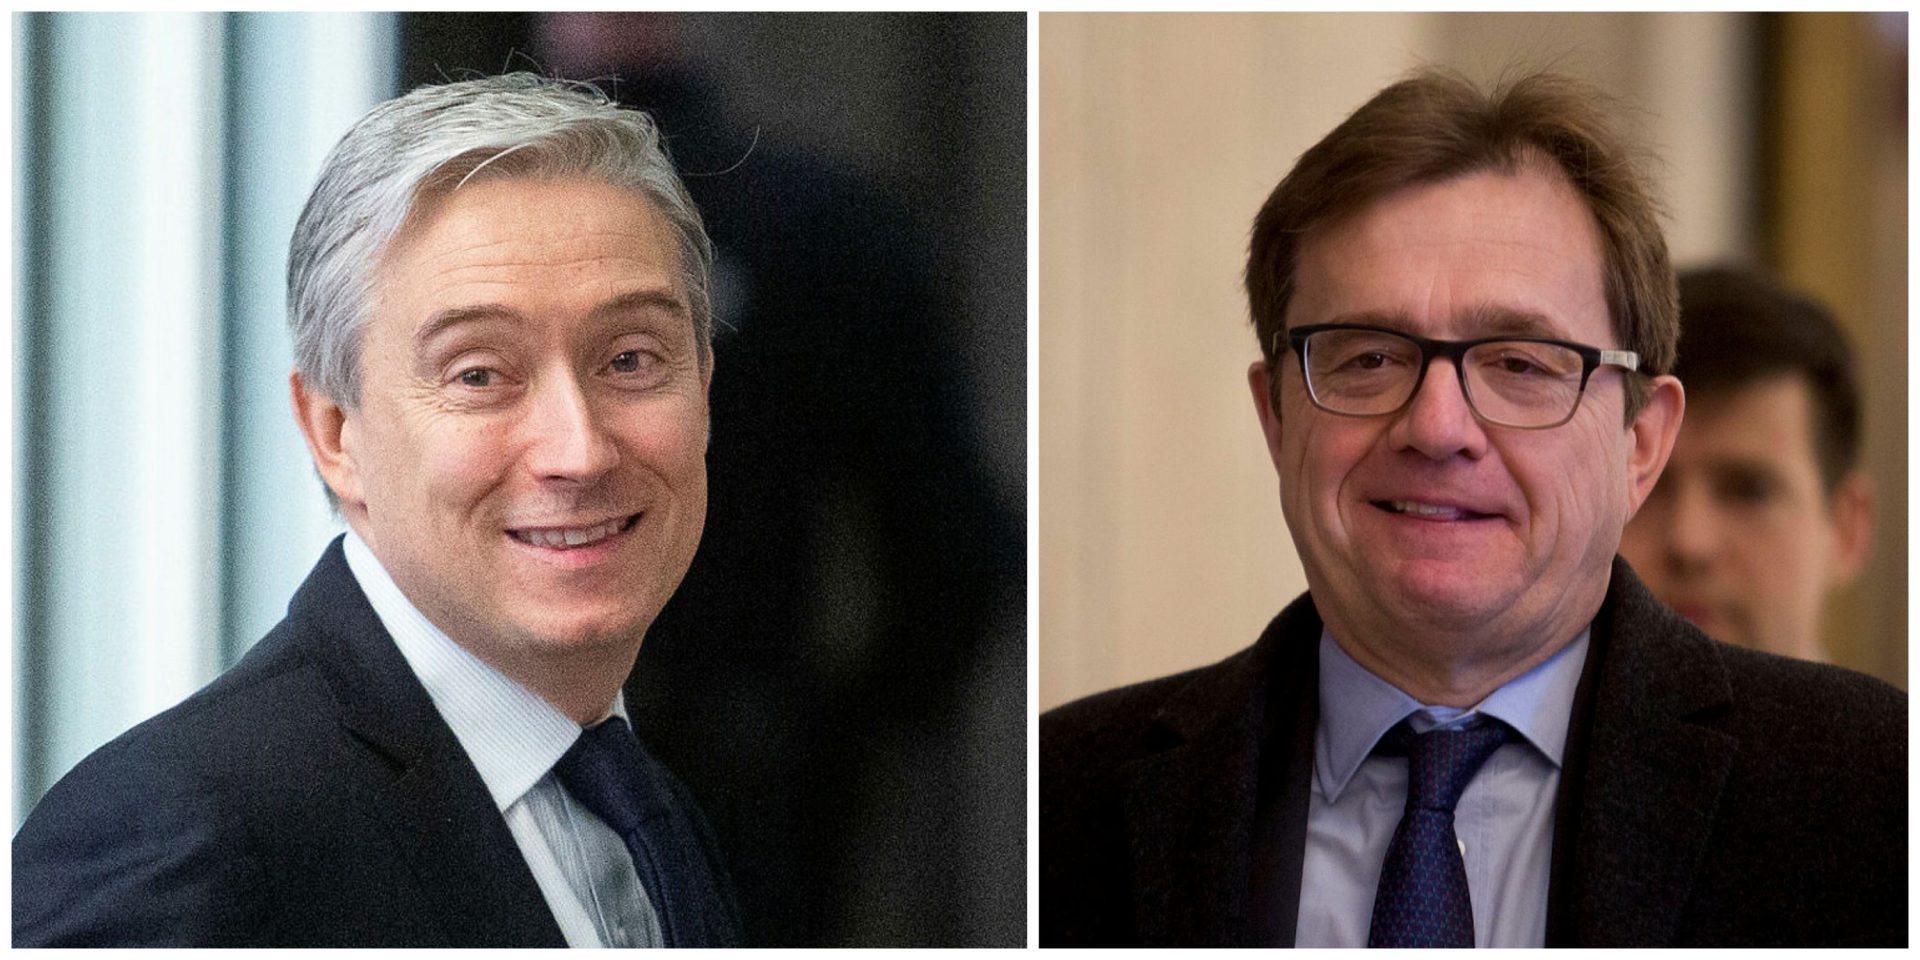 Innovation Minister François-Philippe Champagne and Natural Resources Minister Jonathan Wilkinson fielded the most lobbying activity in 2022, each clocking more than 200 mentions in the lobbying registry.